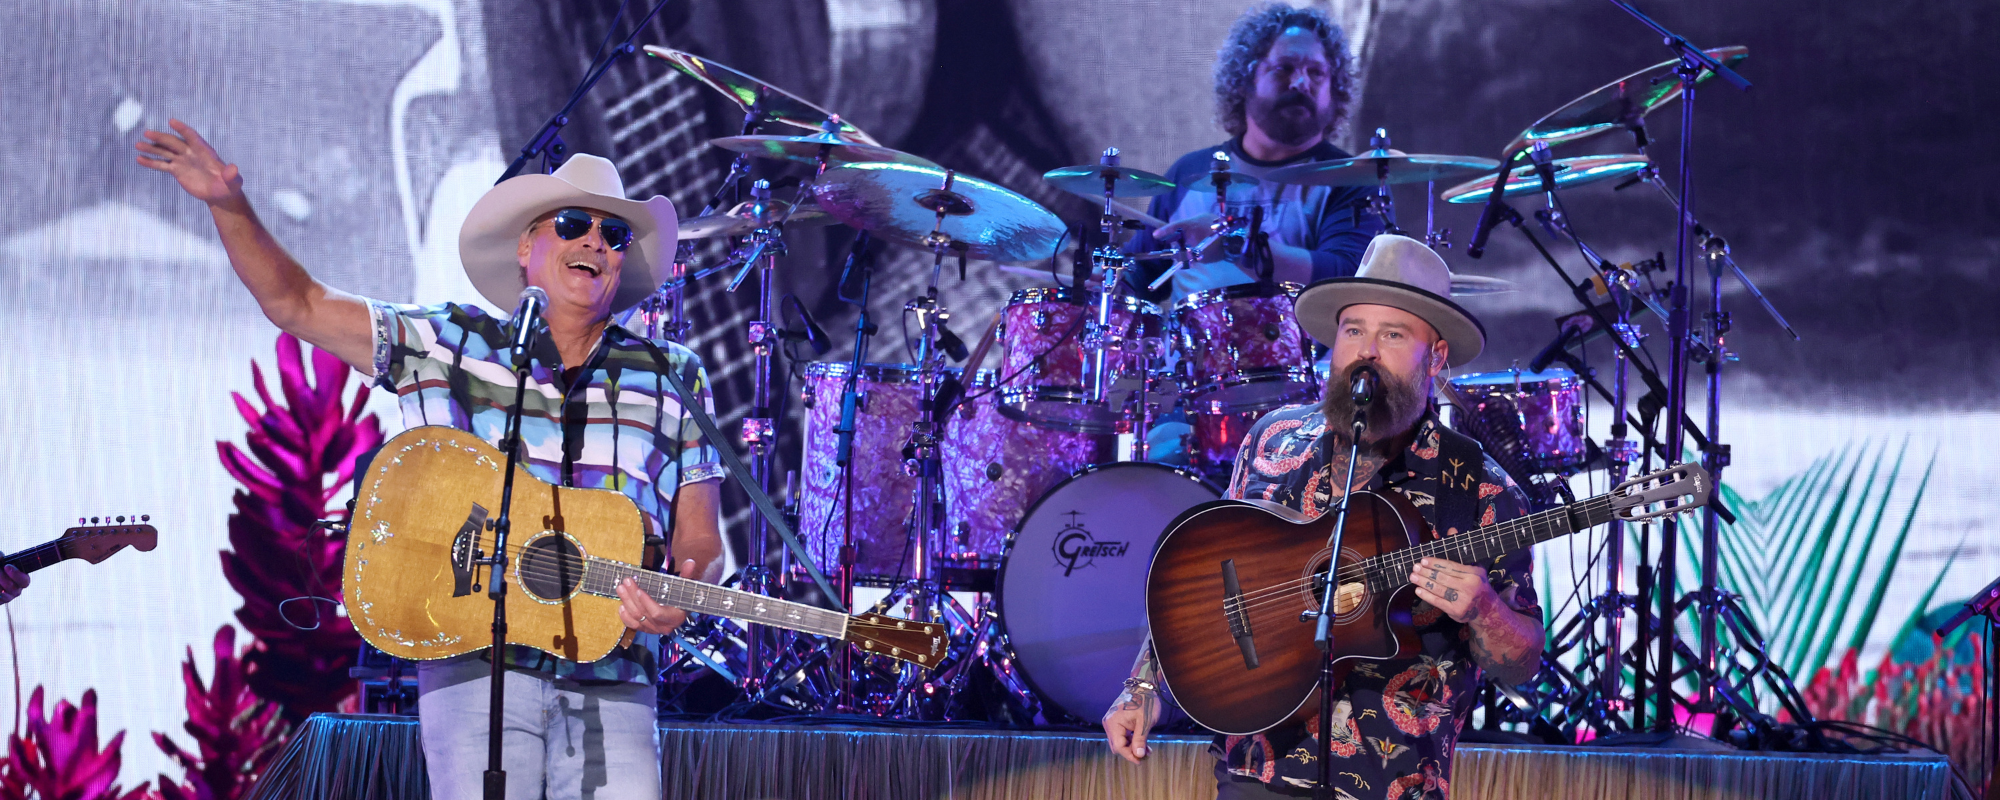 Kenny Chesney, Alan Jackson, Zac Brown, and More Celebrate the Late Jimmy Buffett with All-Star Tribute